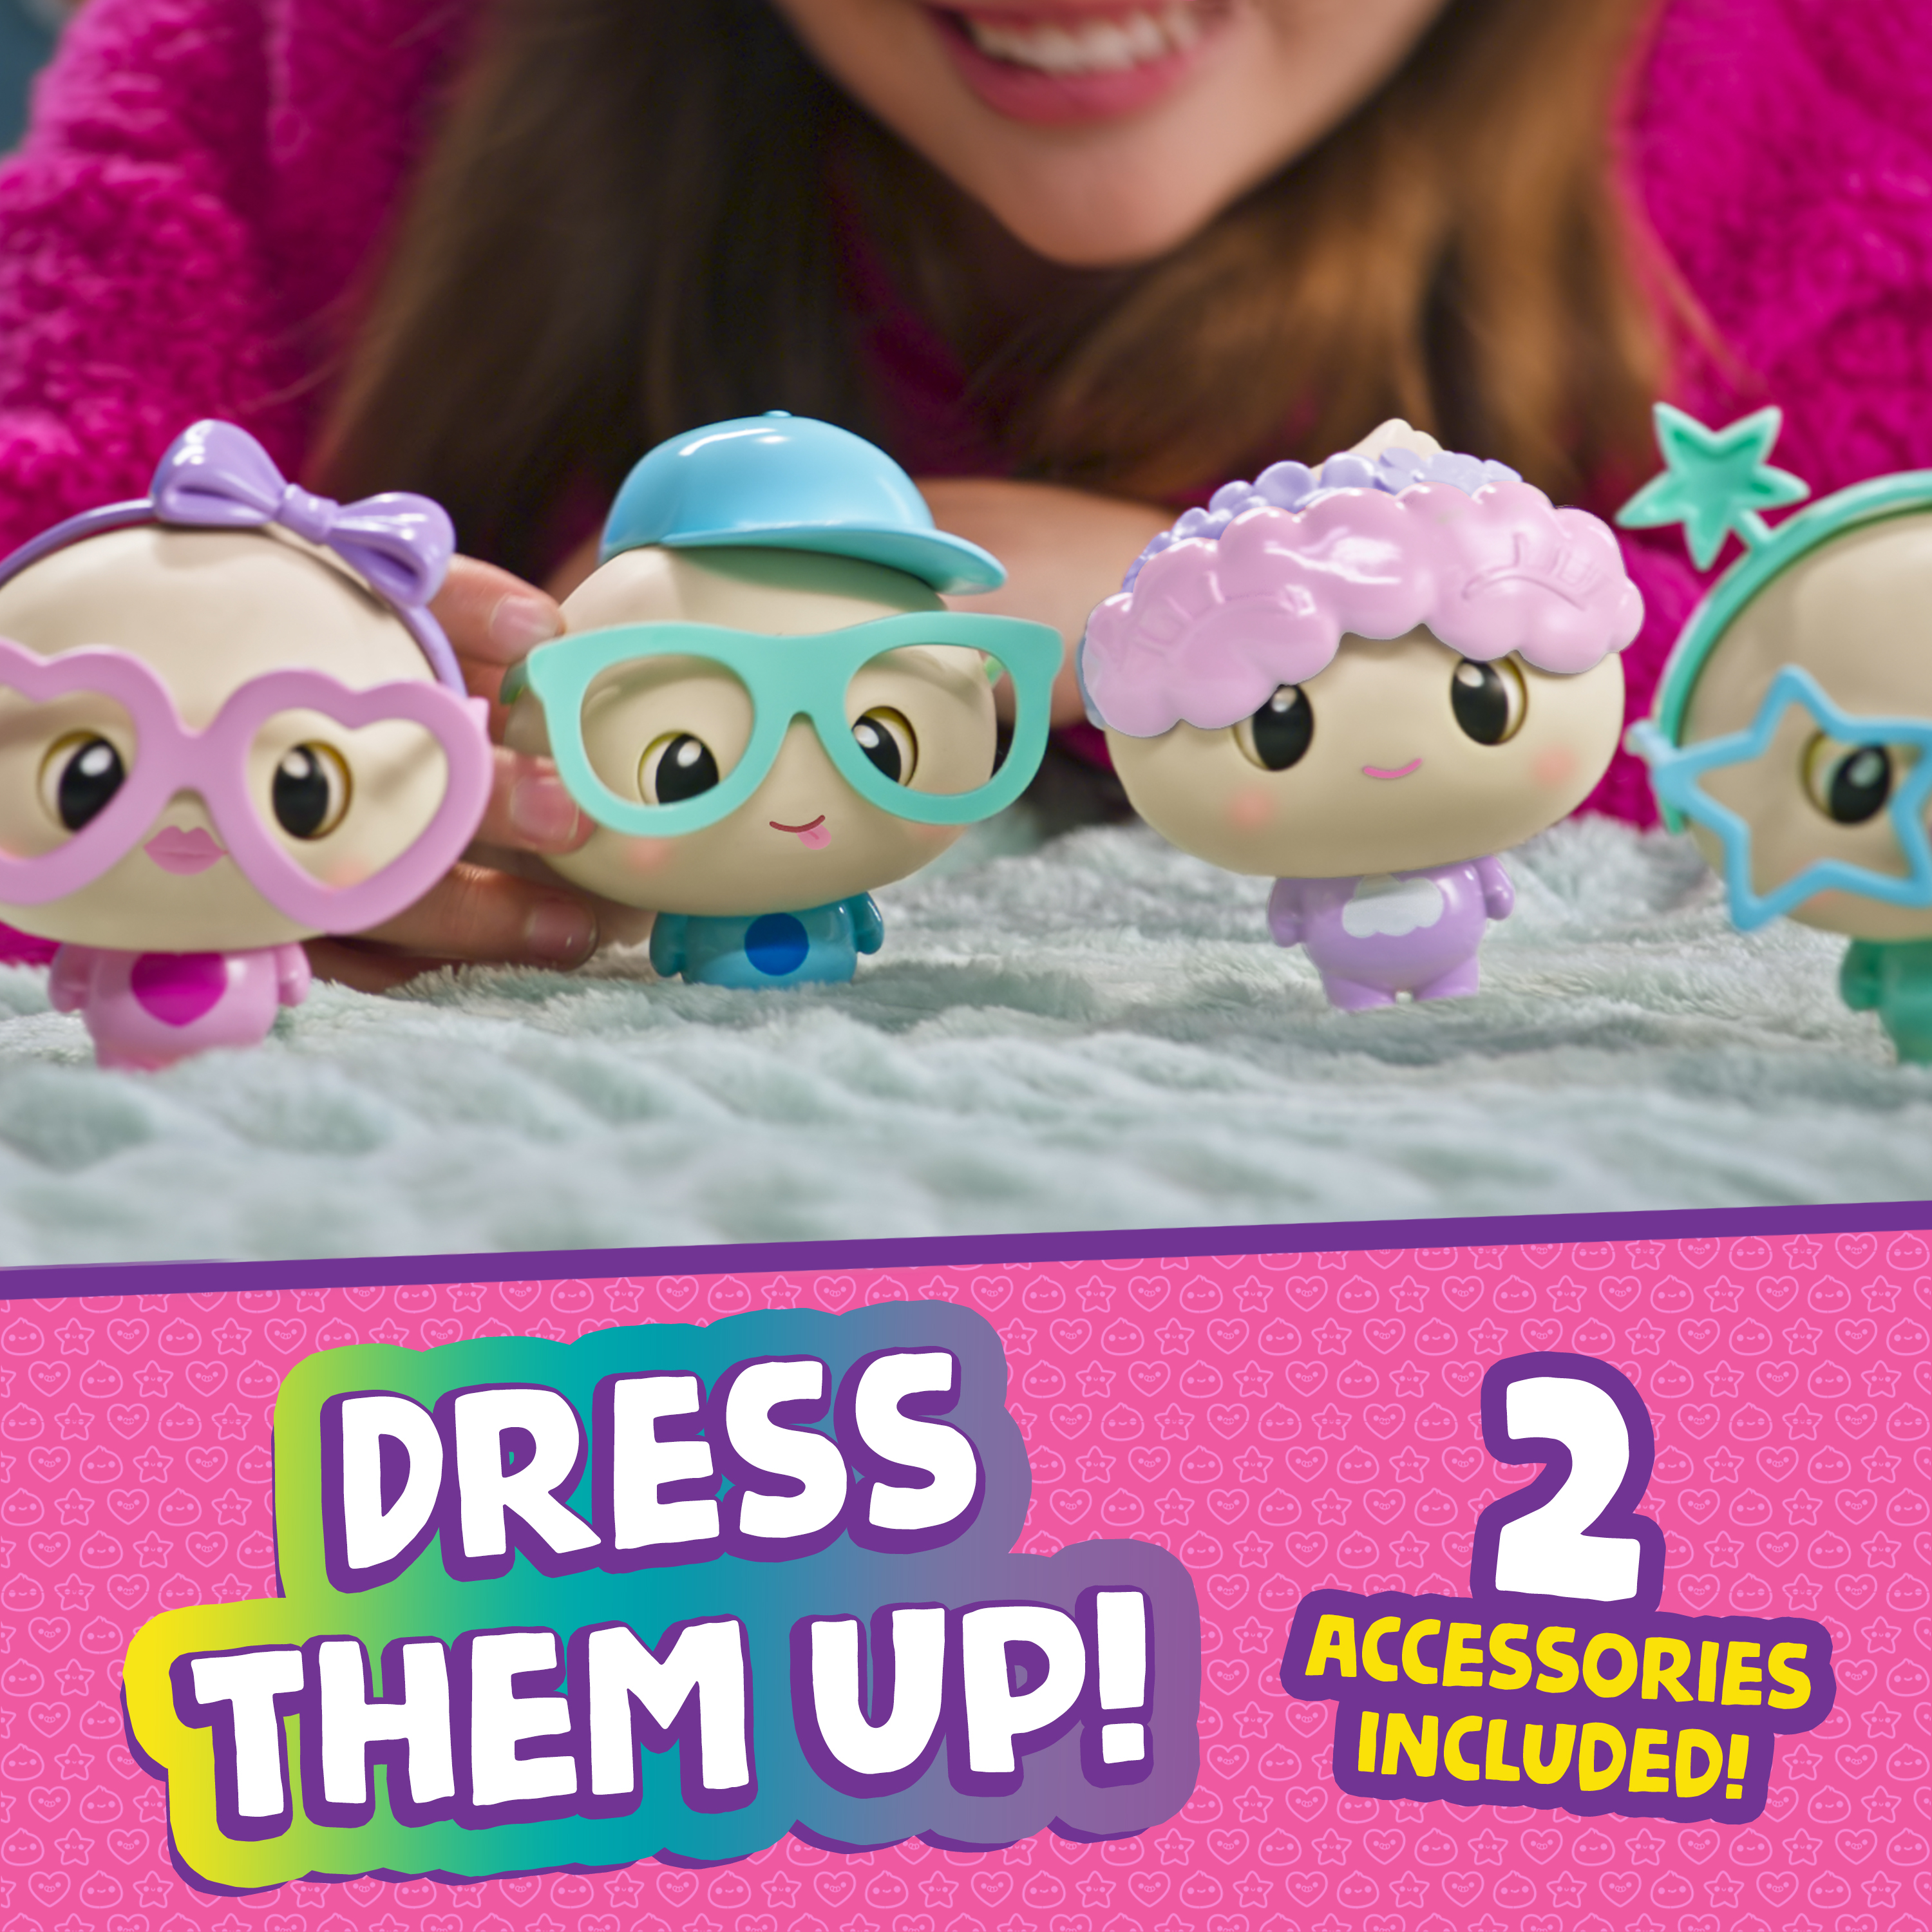 My Squishy Little Dumplings – Interactive Doll Collectible With Accessories – Dee (Pink) - image 5 of 8